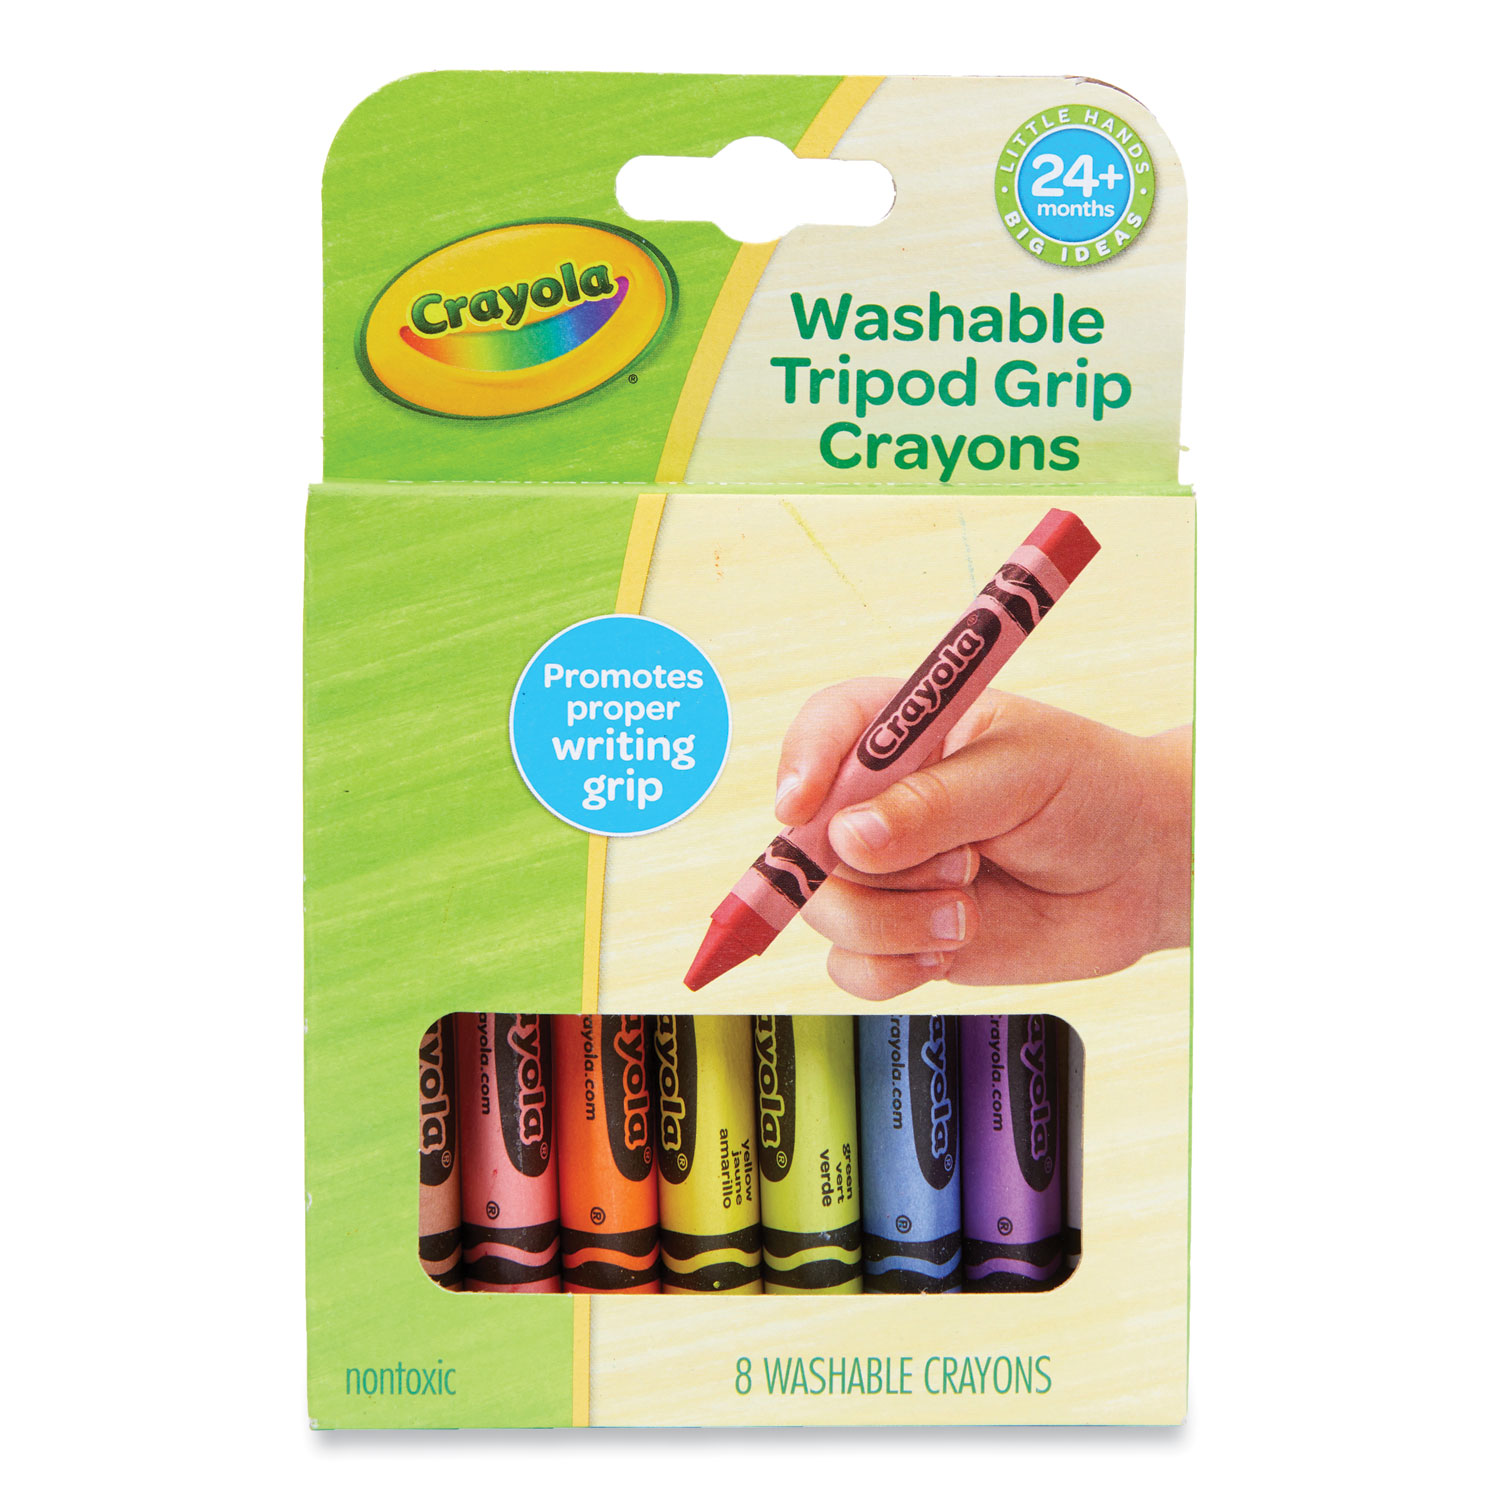 Ultra-Clean Washable Markers, Fine tip, Bold Colors, 8 Per Box, 6